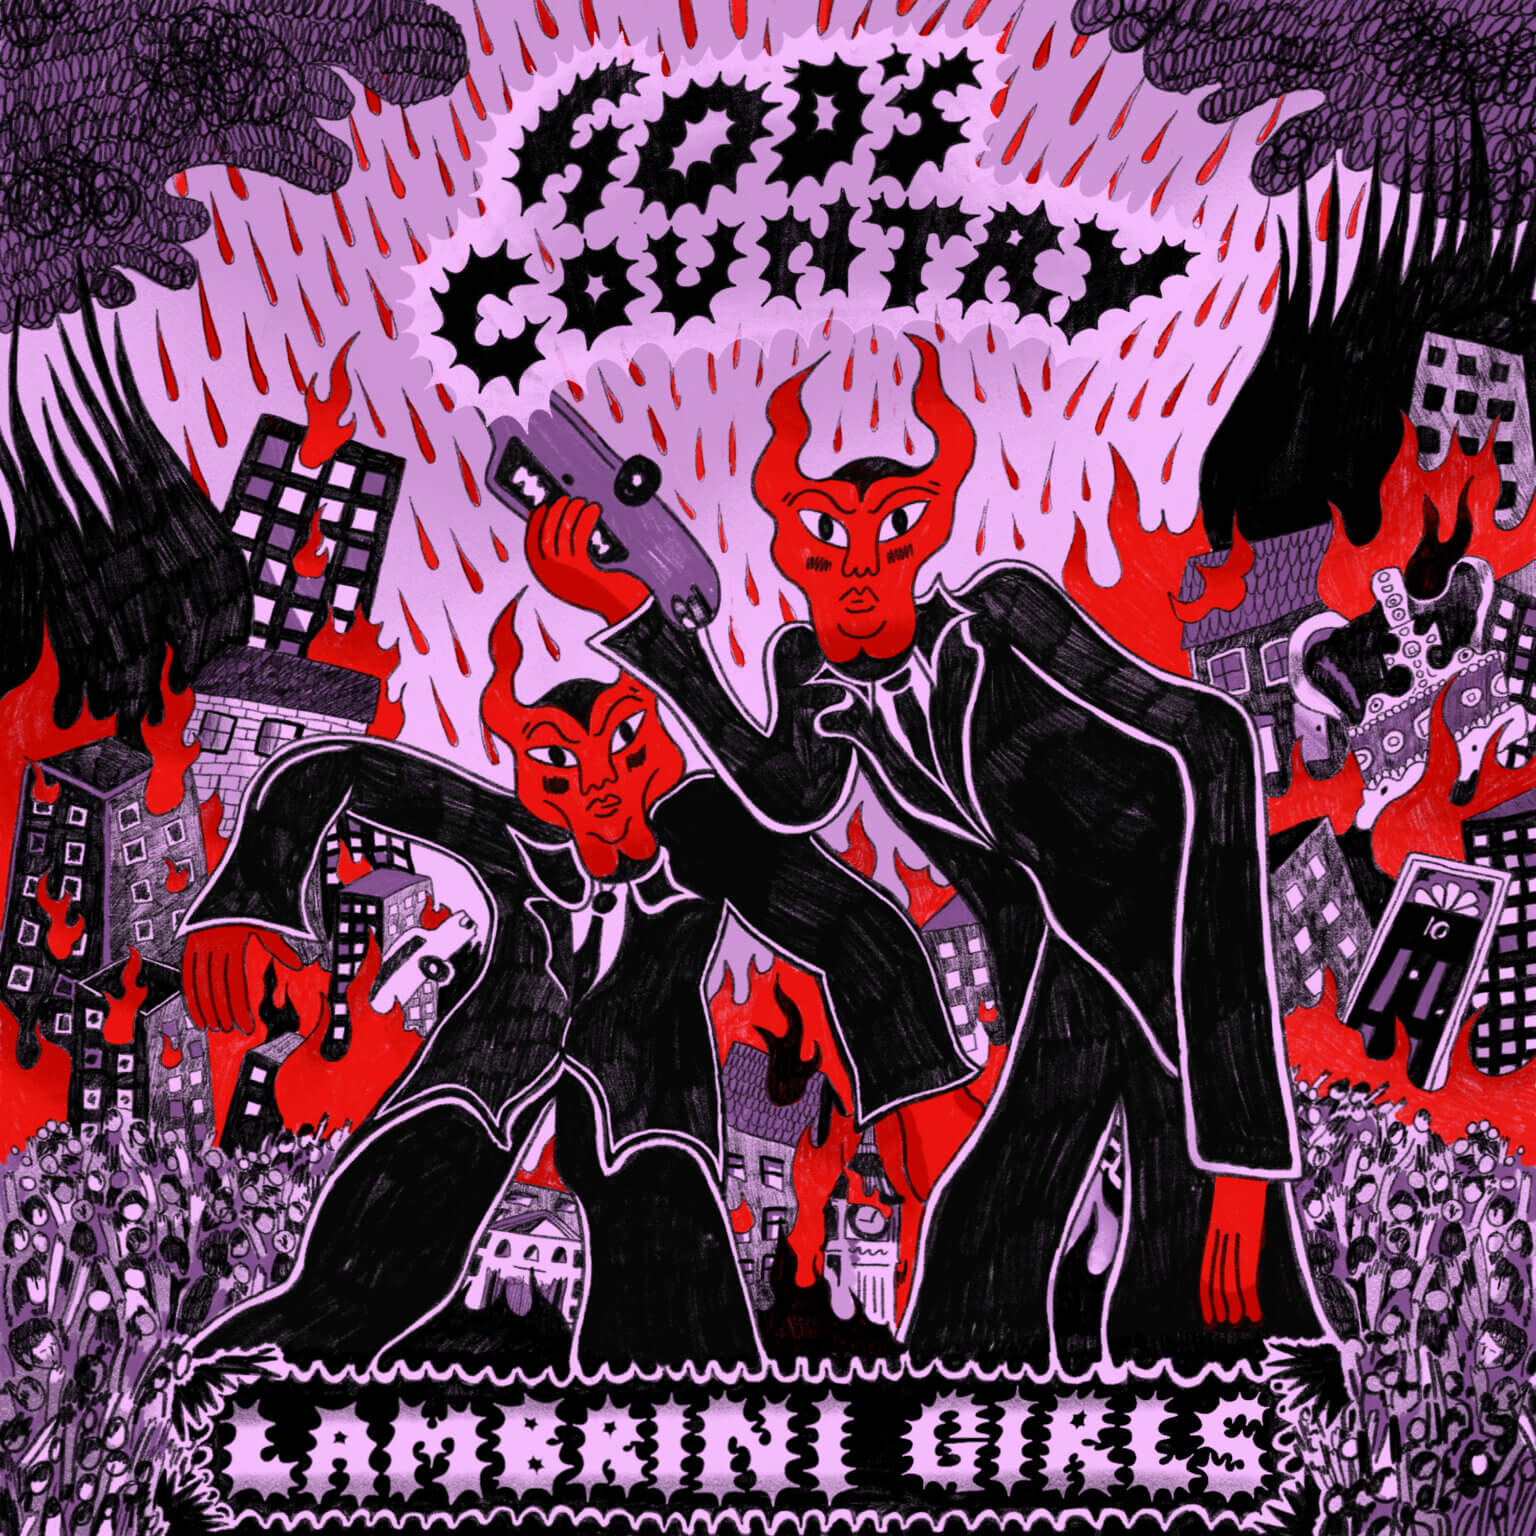 "God’s Country" By Lambrini Girls is northern Transmissions Song of the Day. The UK band's track is now available via City Slang